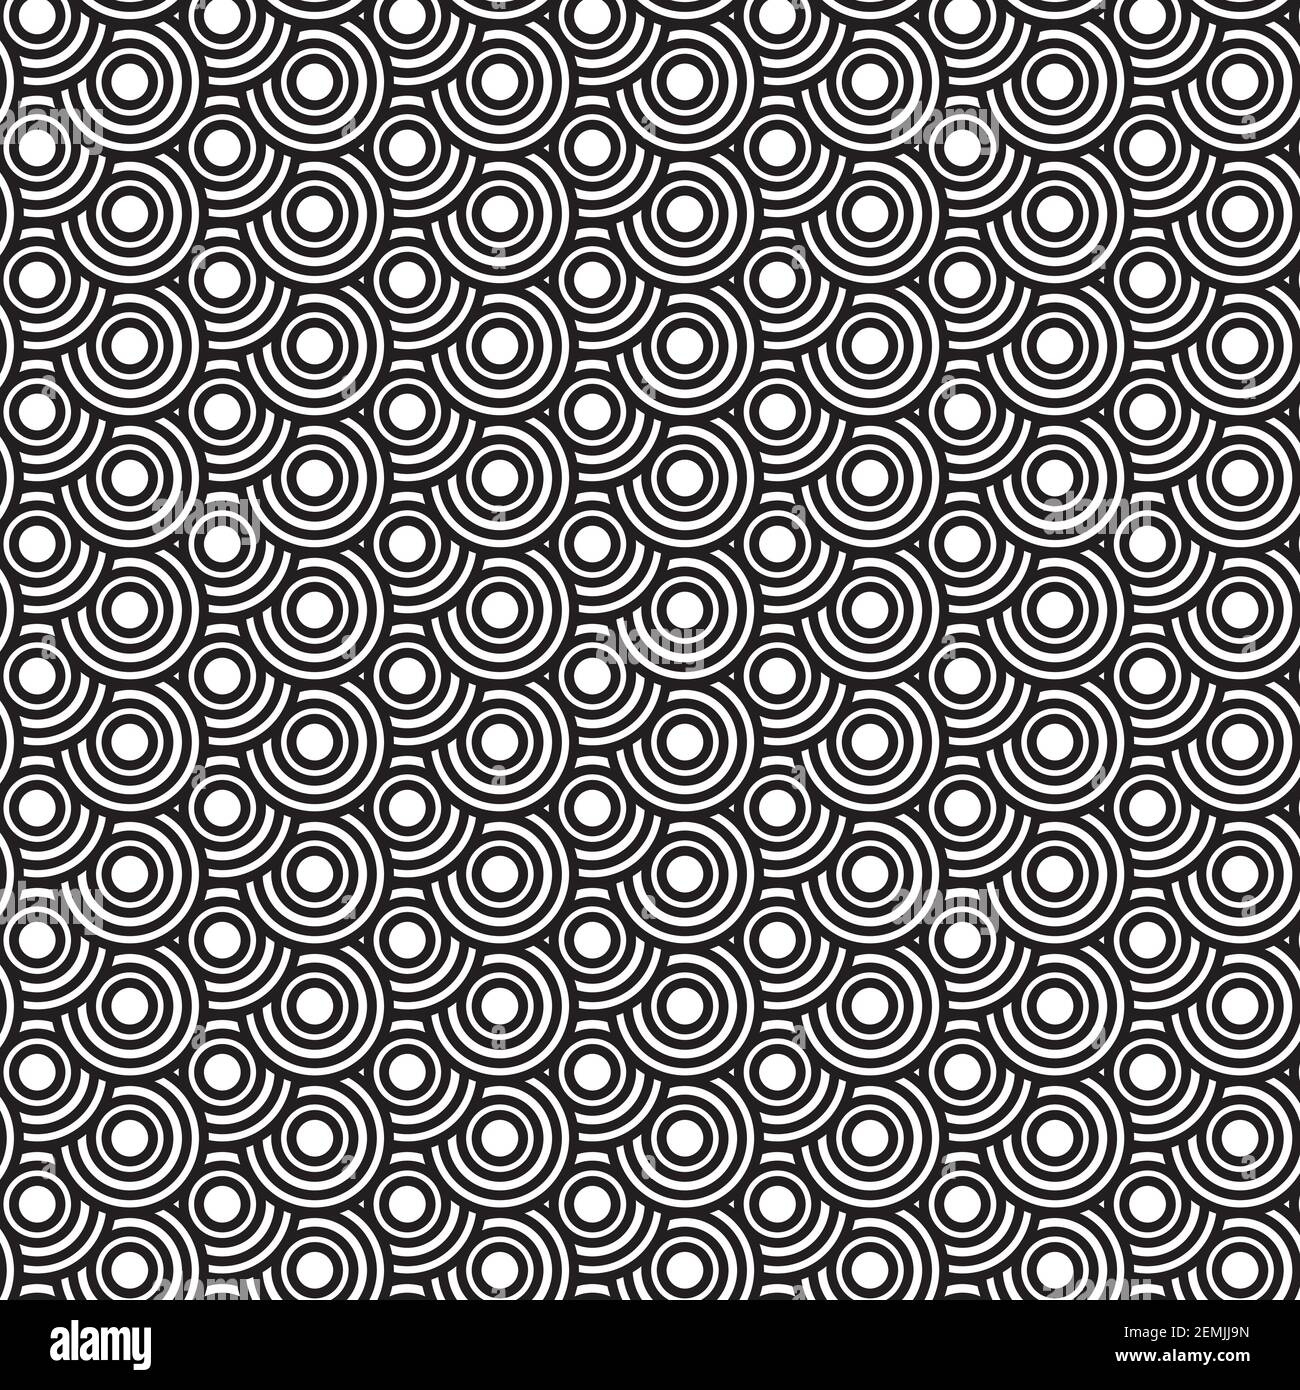 Black and white geometric circle shaped seamless pattern background Stock Vector